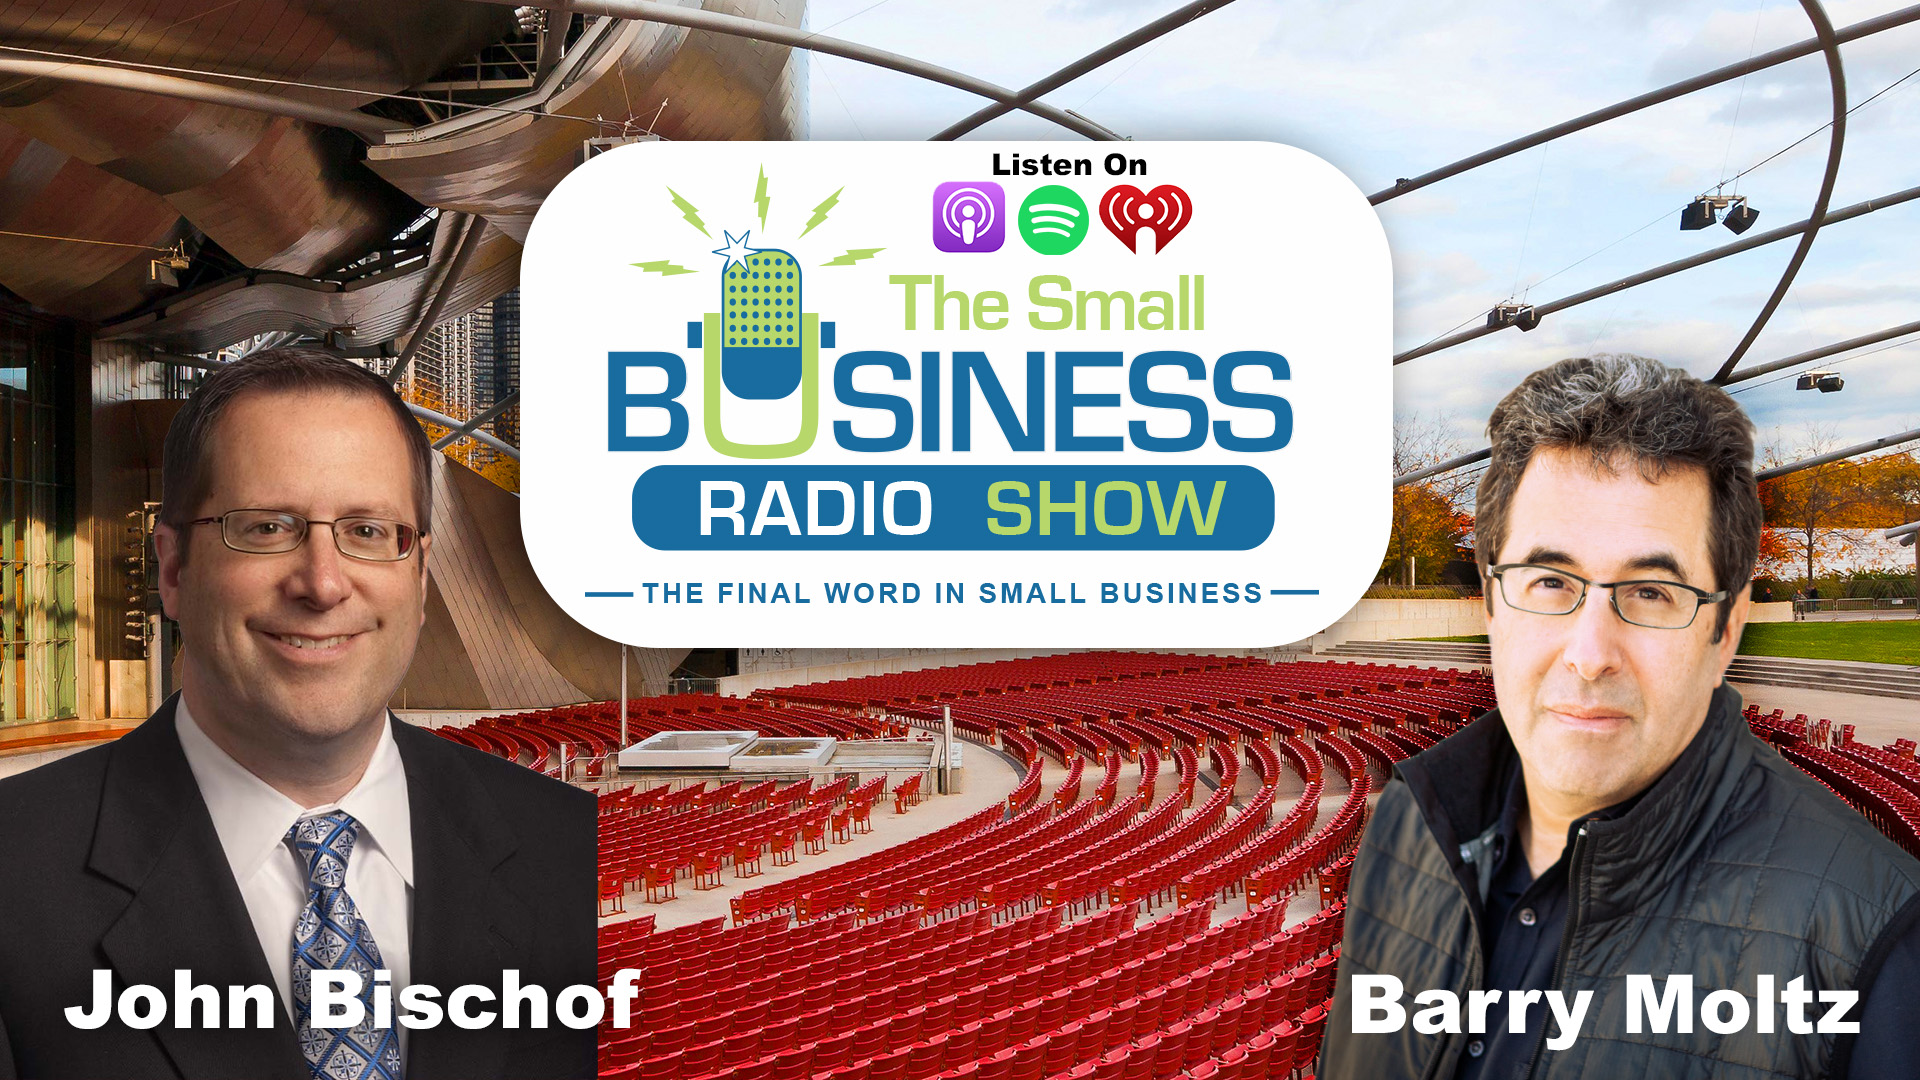 John Bischof on The Small Business Radio Show